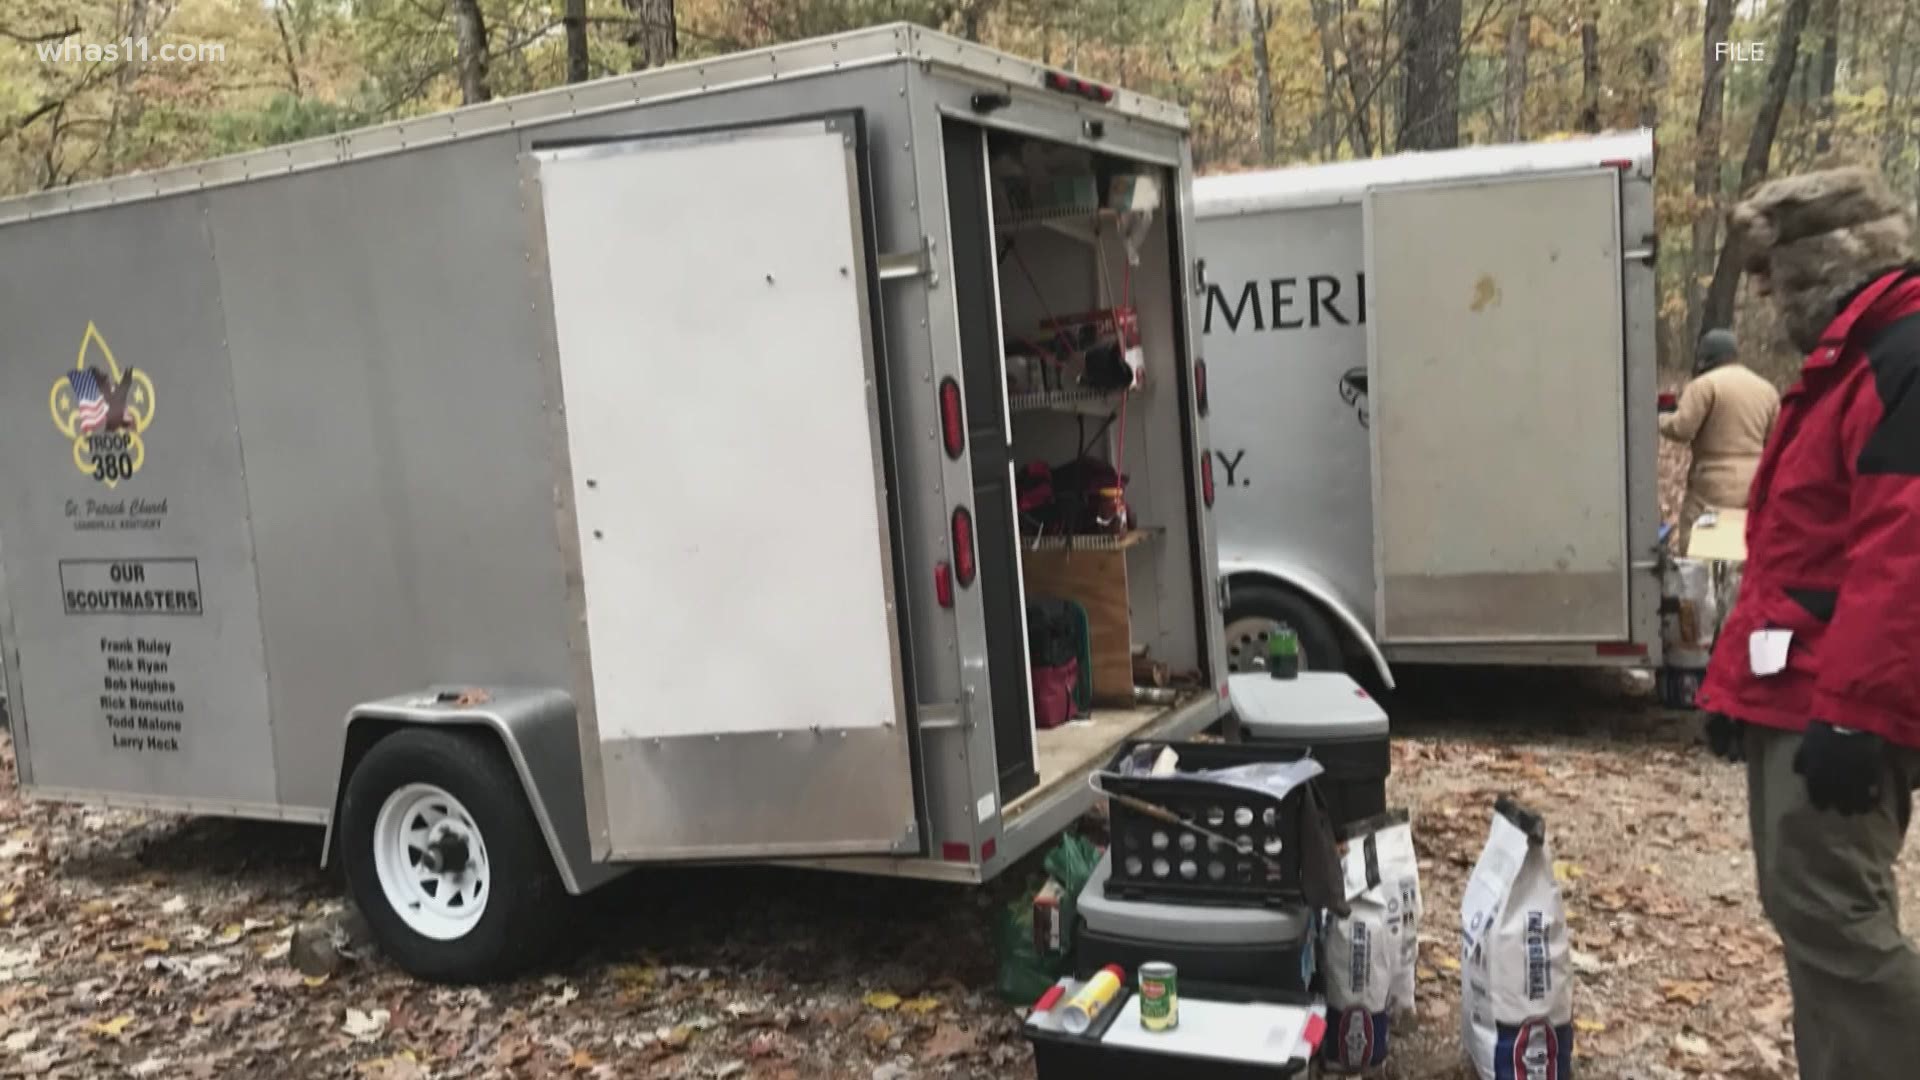 After their trailer equipped with their camping supplies was taken from a Louisville church, the troop is turning to the community for help.